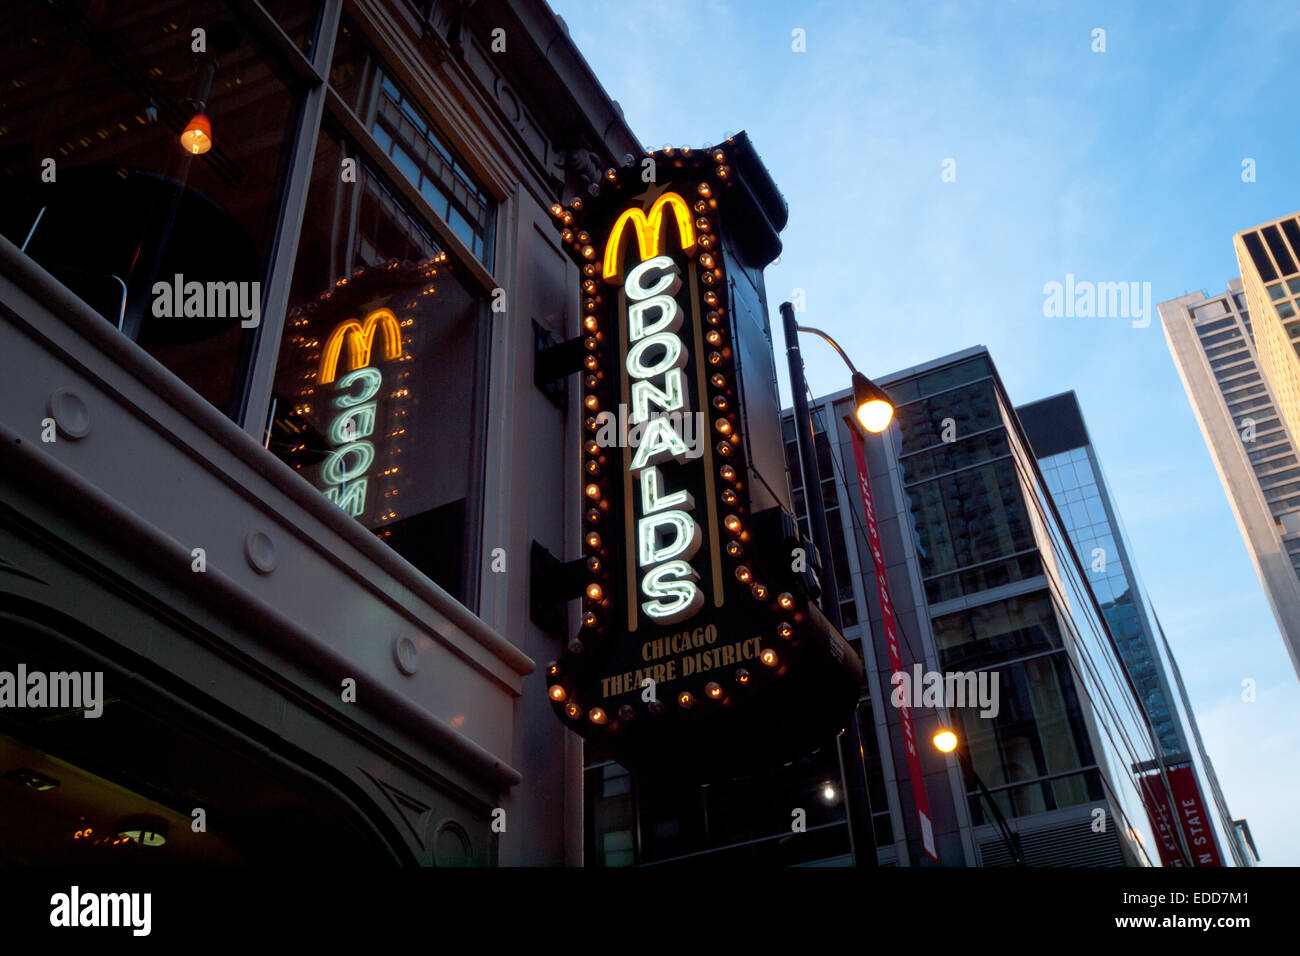 A view of the sign and exterior of a McDonald's restaurant in the Theatre District of downtown Chicago, Illinois. Stock Photo